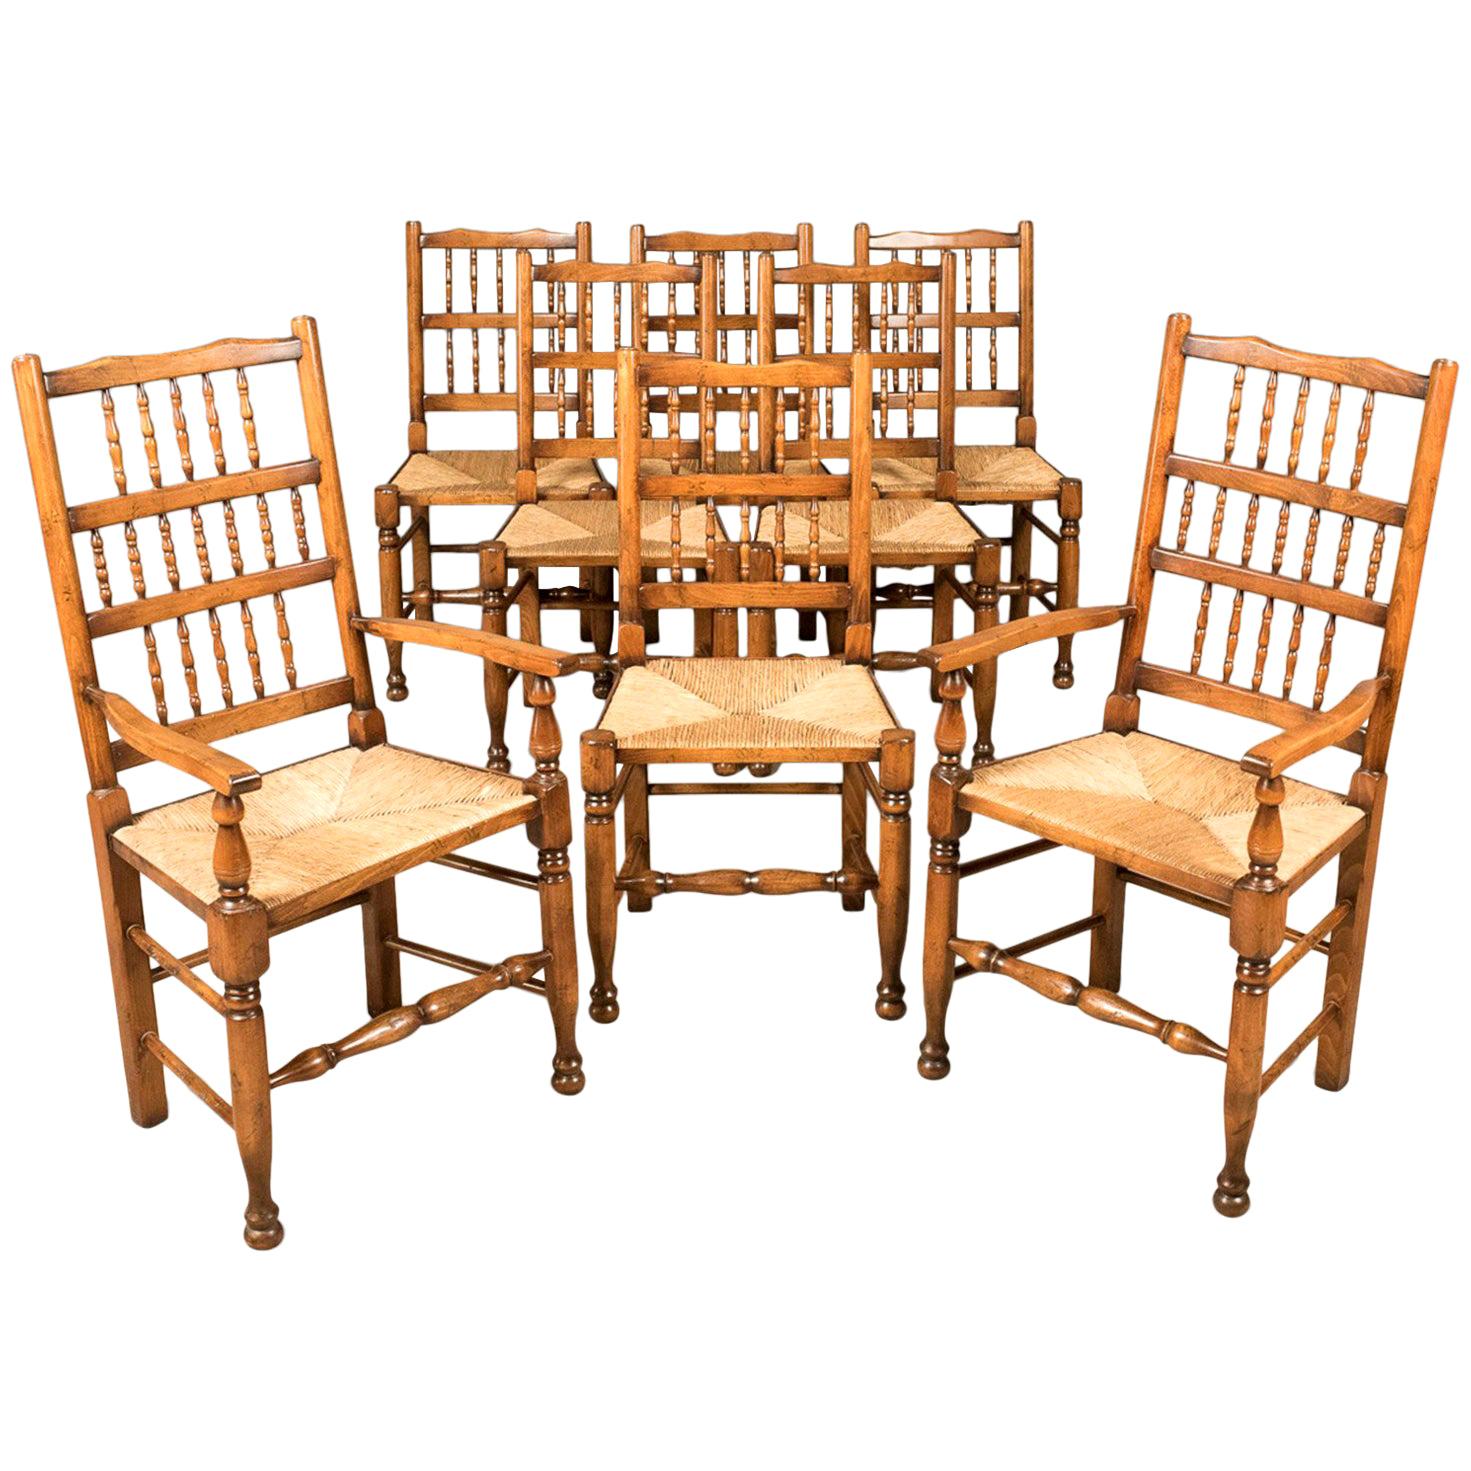 Set of Eight Dining Chairs, Lancashire Spindleback, English Quality 20th Century